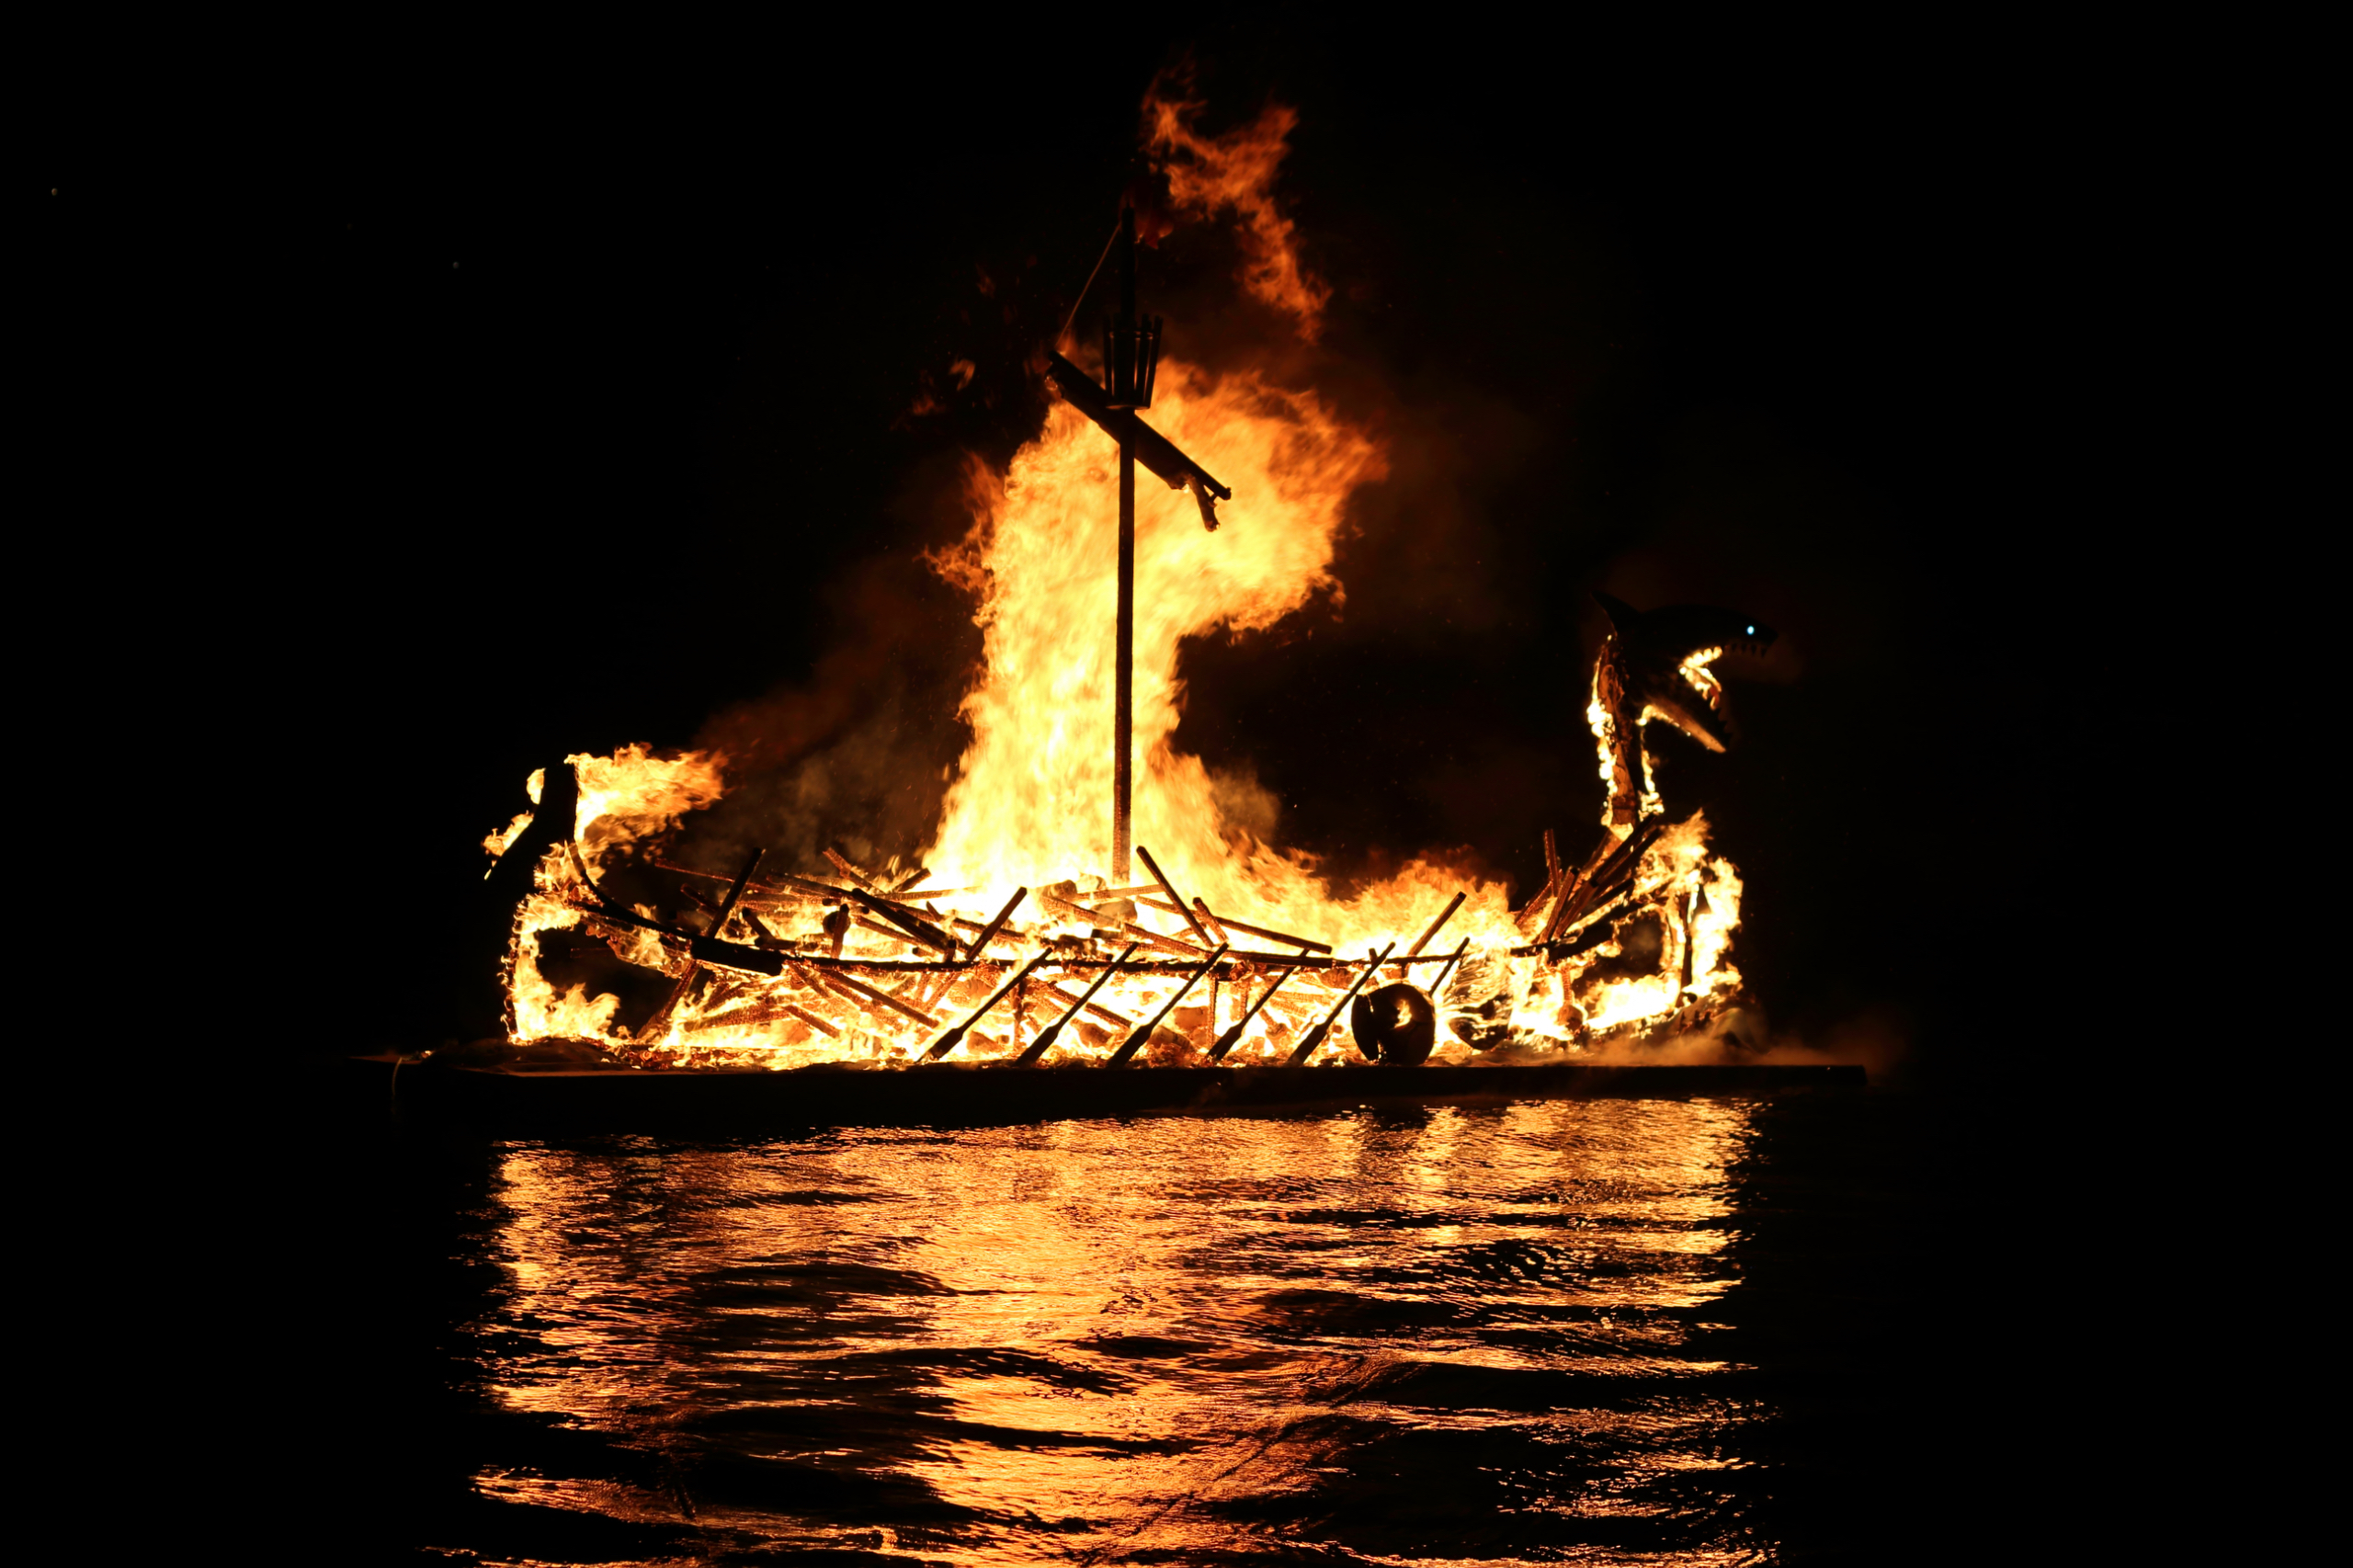 The burning galley is a symbol of Up Helly Aa